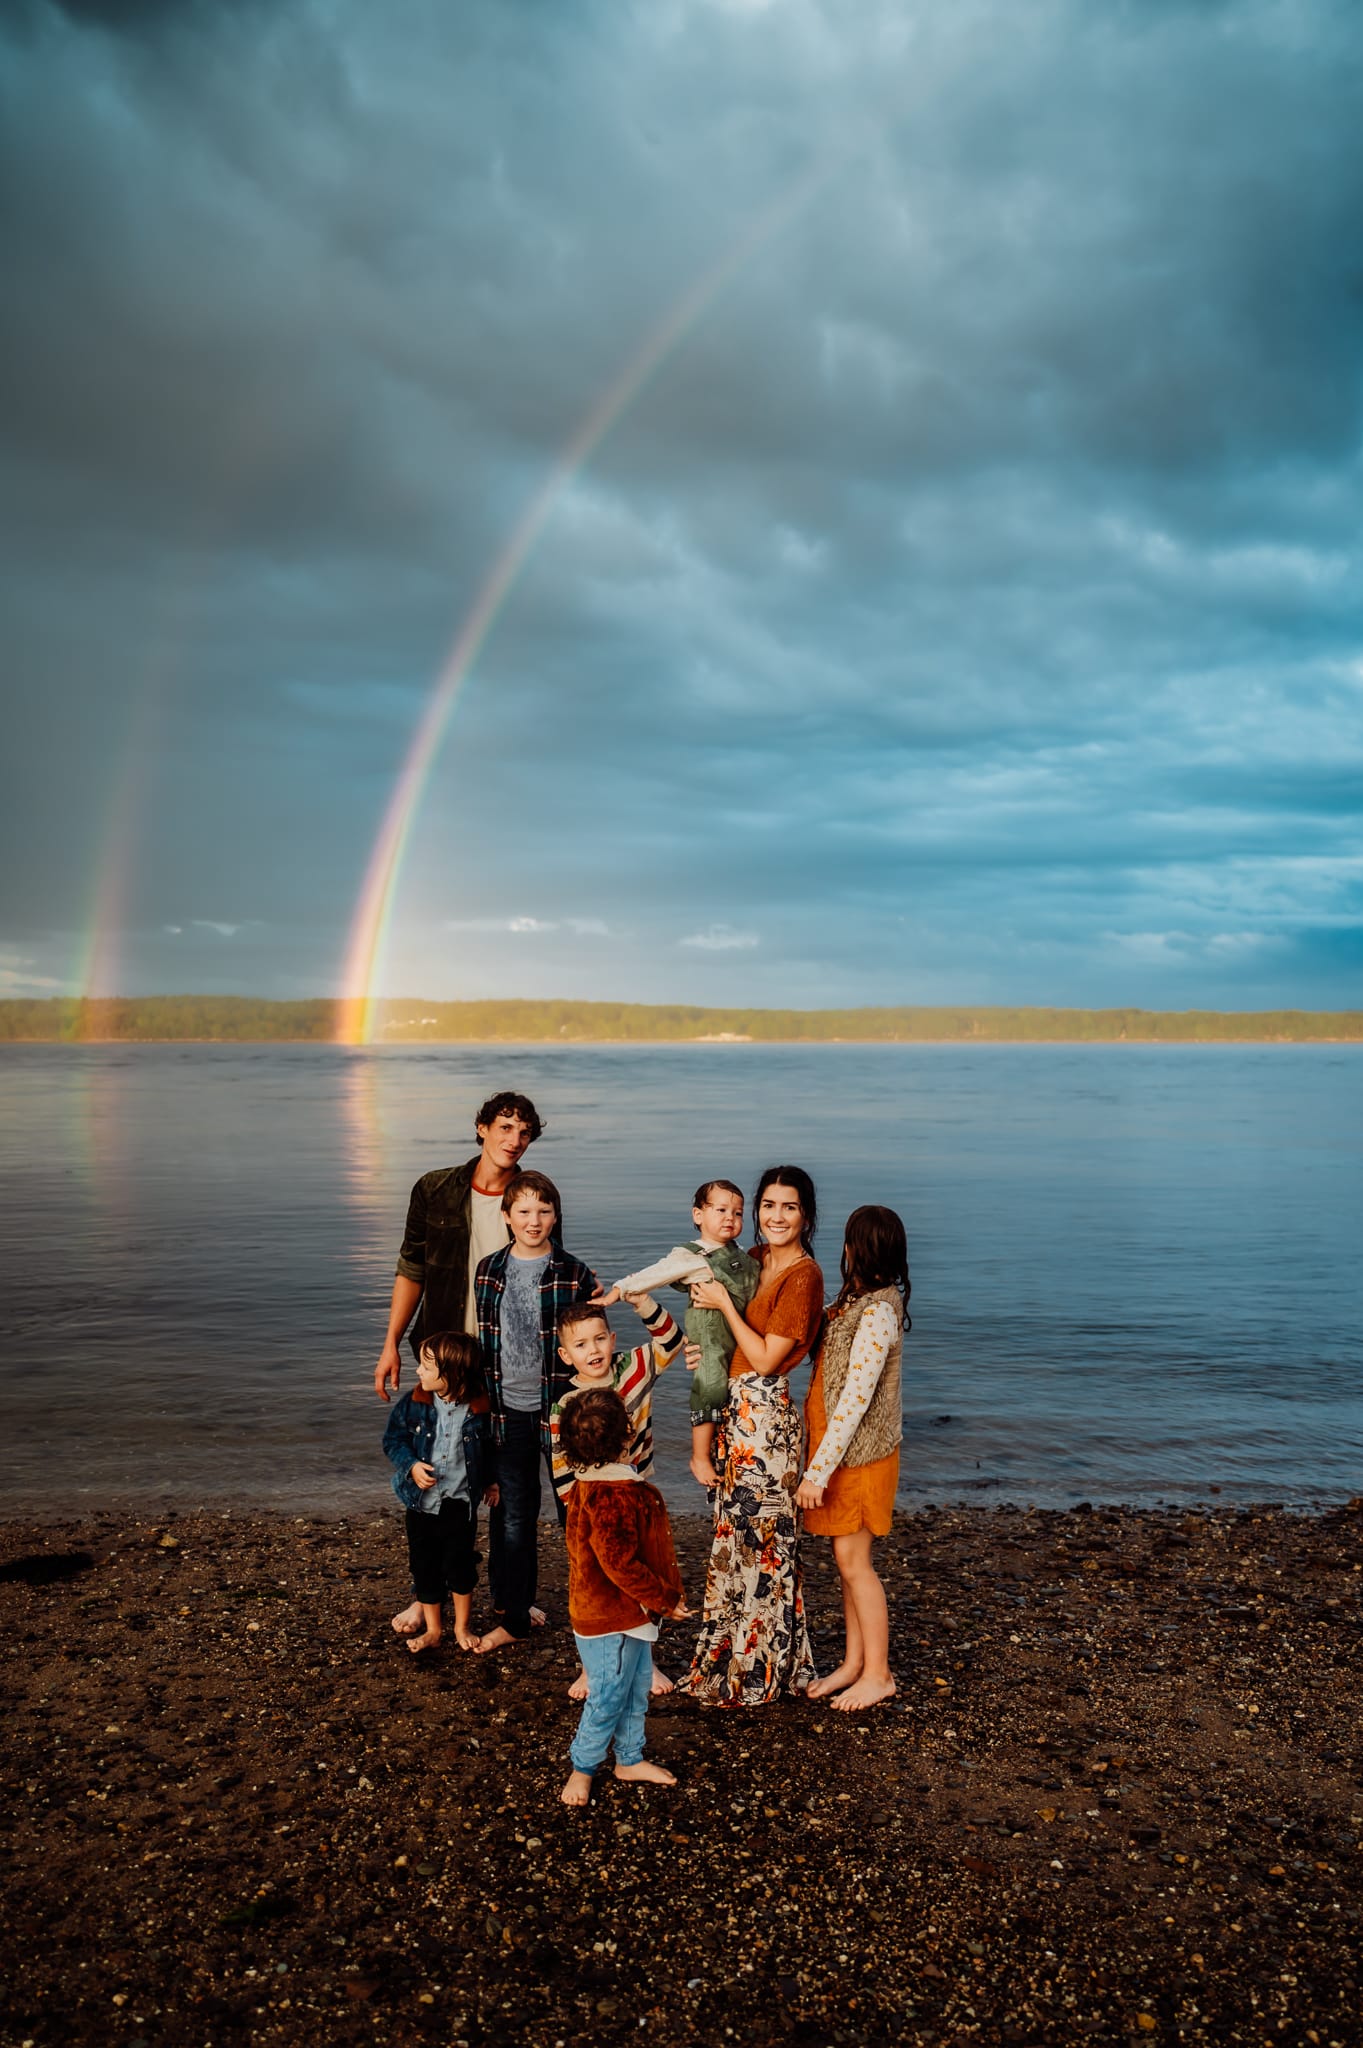 Big family with lots of kids in front of water with dark clouds and rainbows